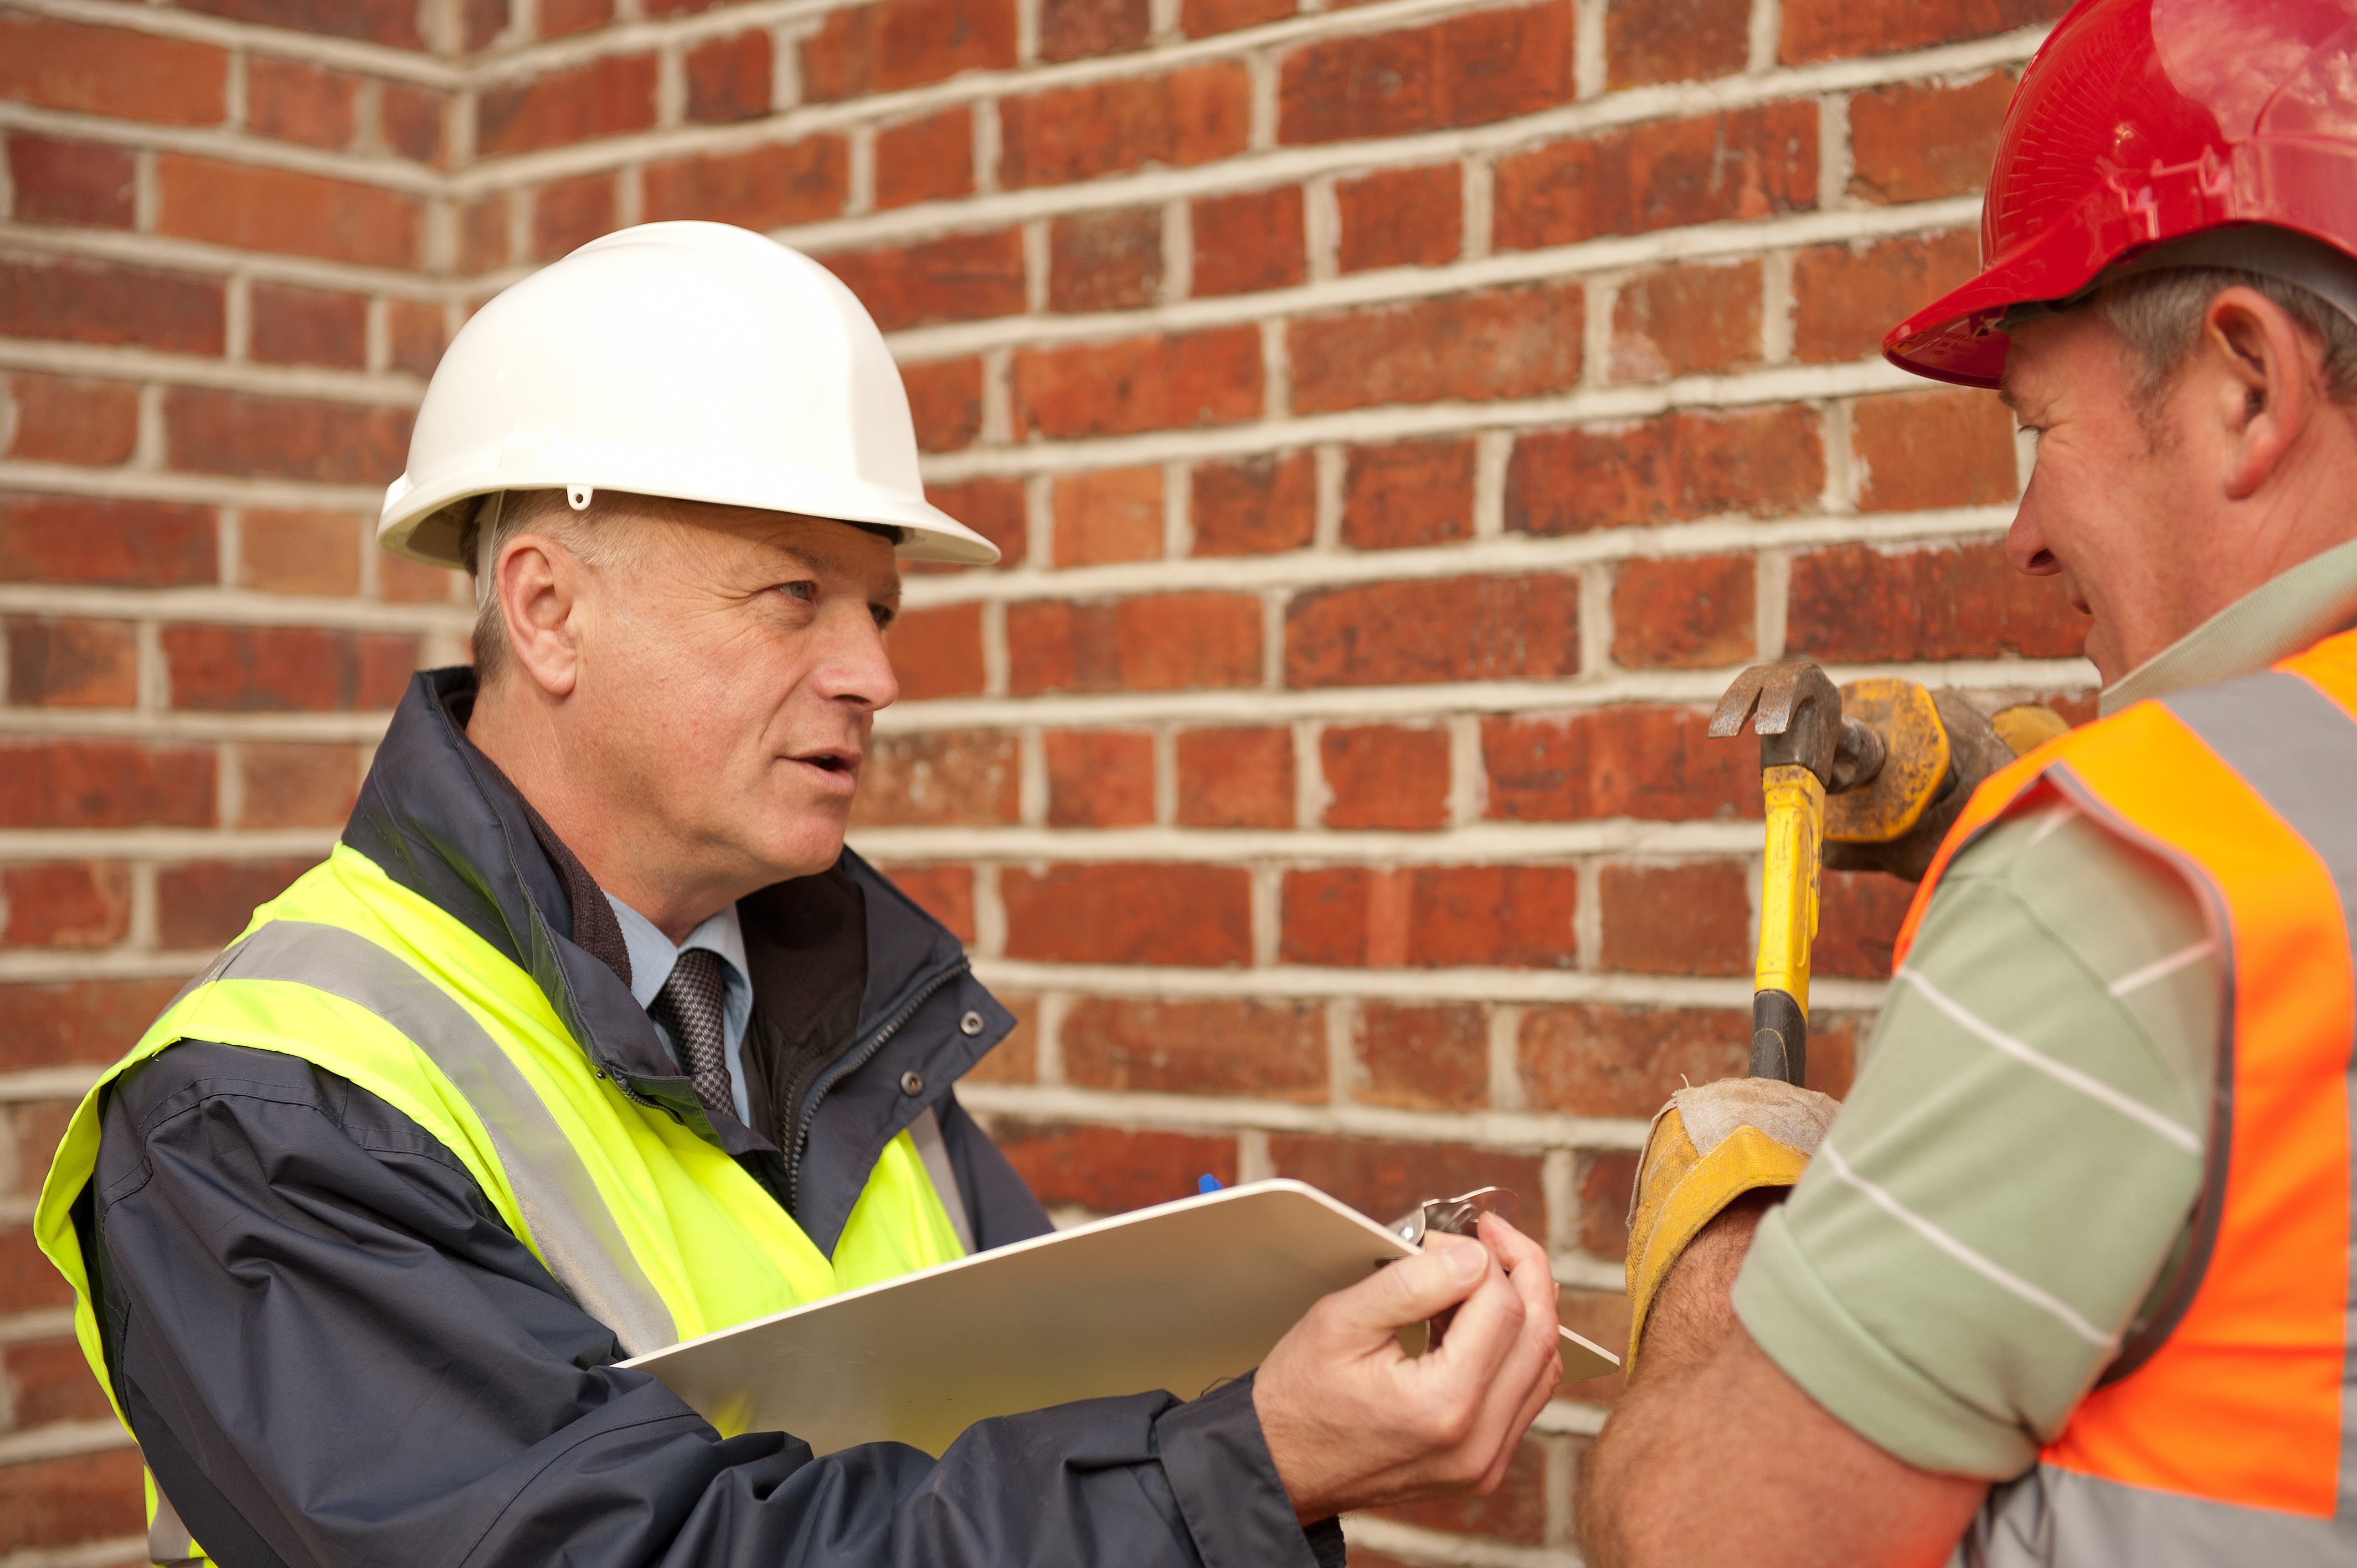 OSHA compliance officer with tablet talking to other worker